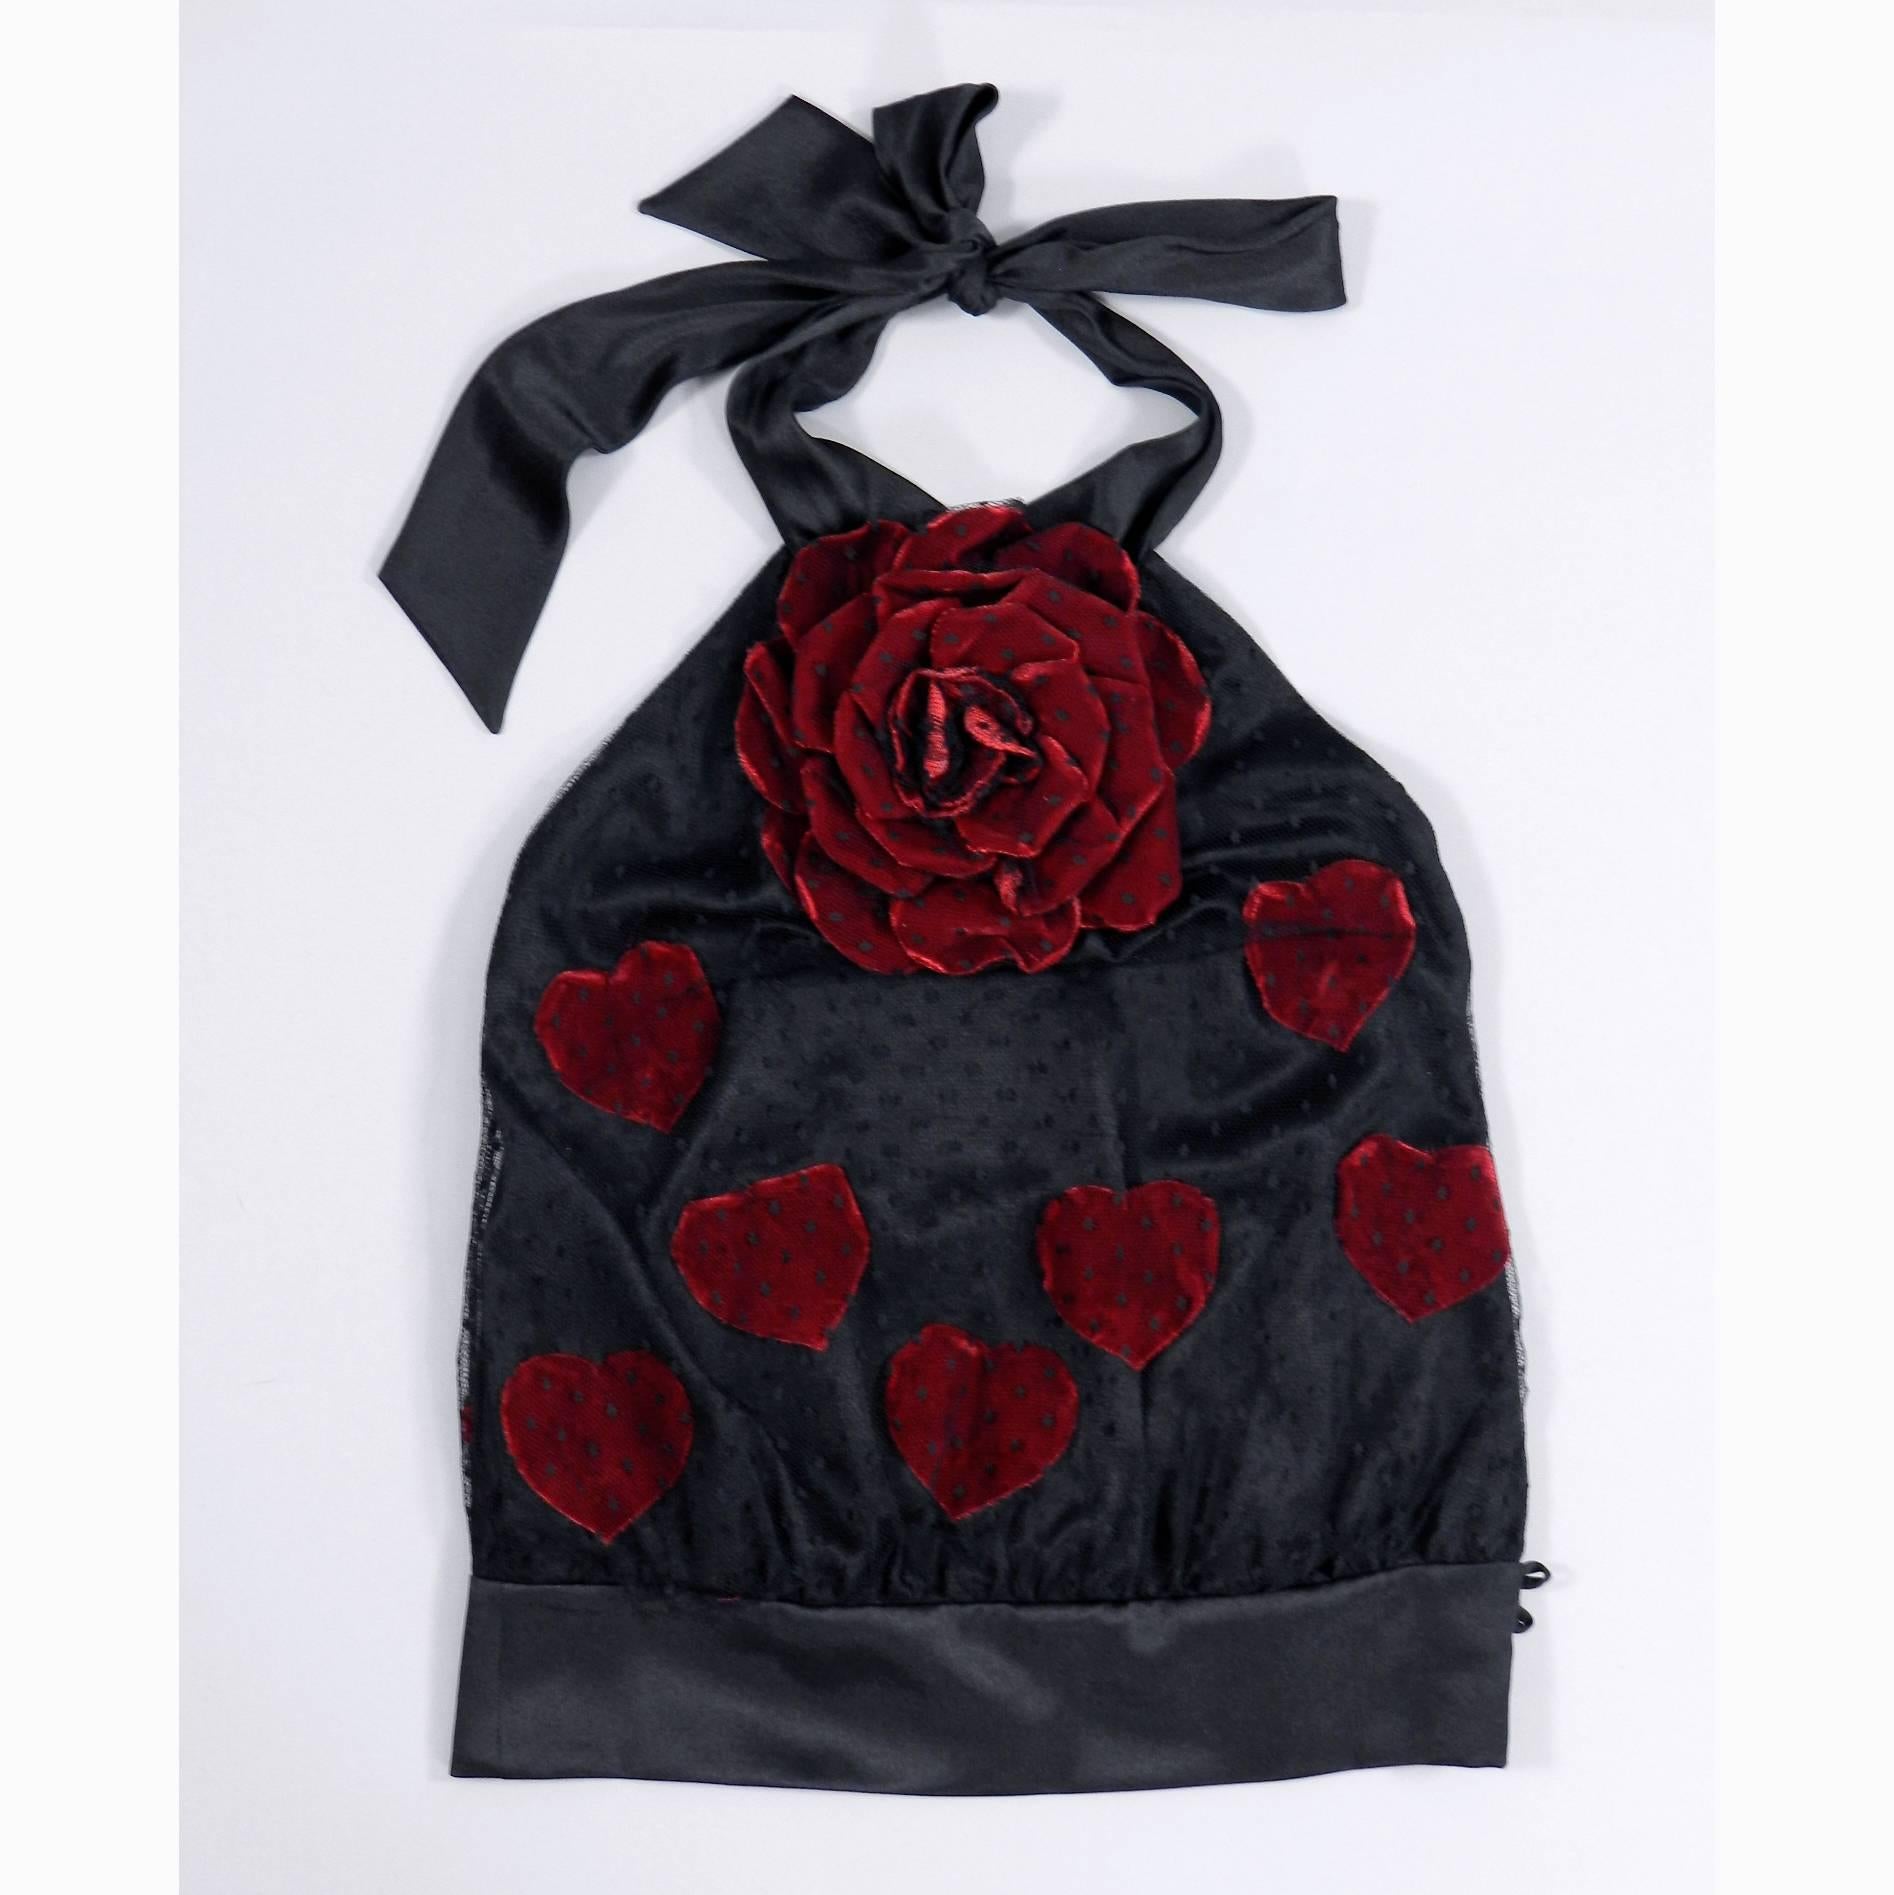 Moschino black lace halter top with red velvet rose and hearts 3